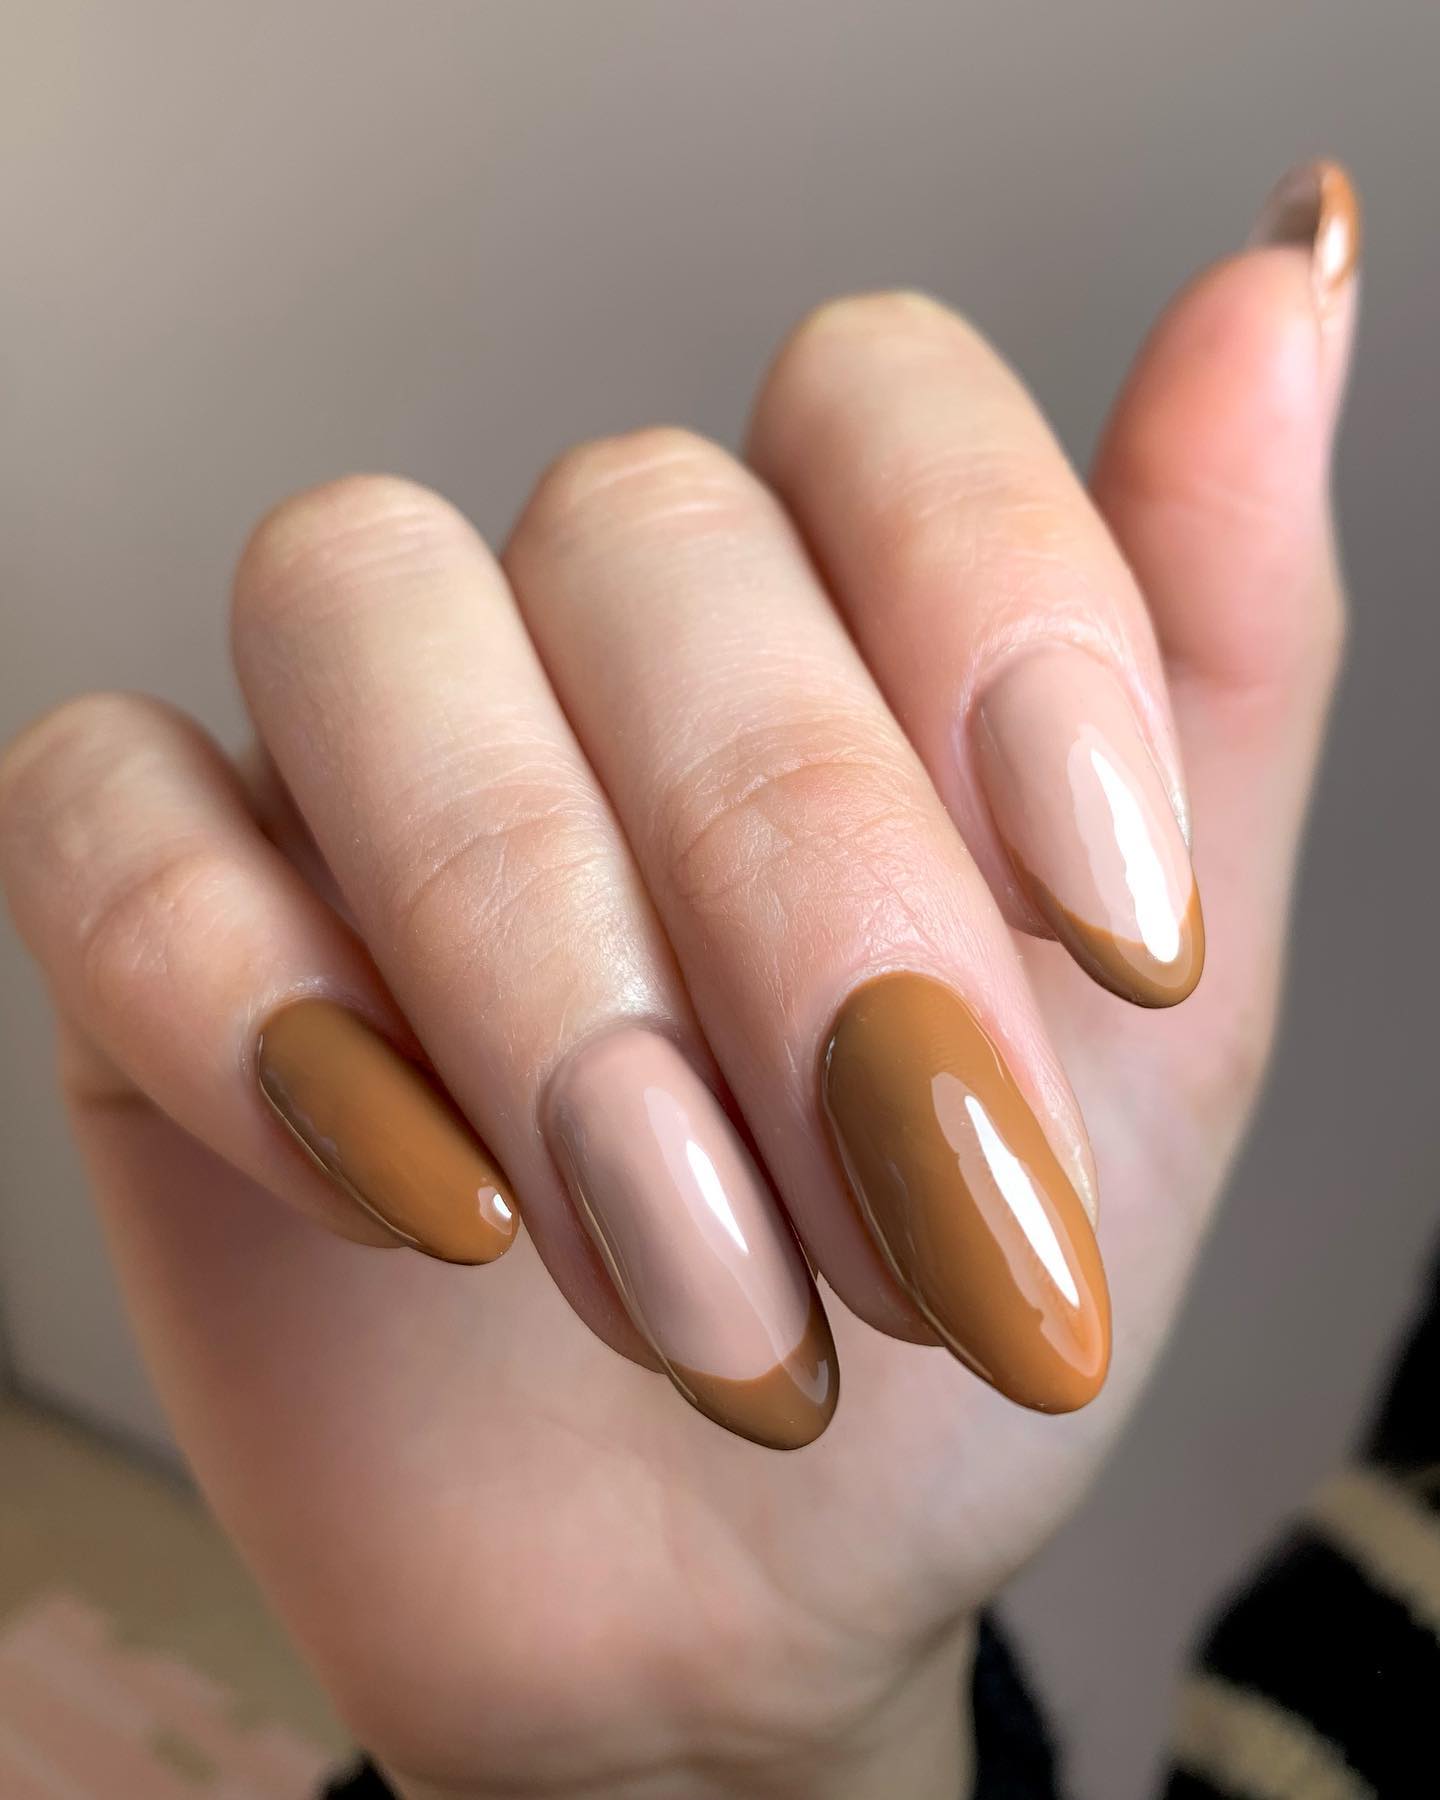 If you enjoy nude or brown nails check out this creation. It is a gorgeous nude option for any season.